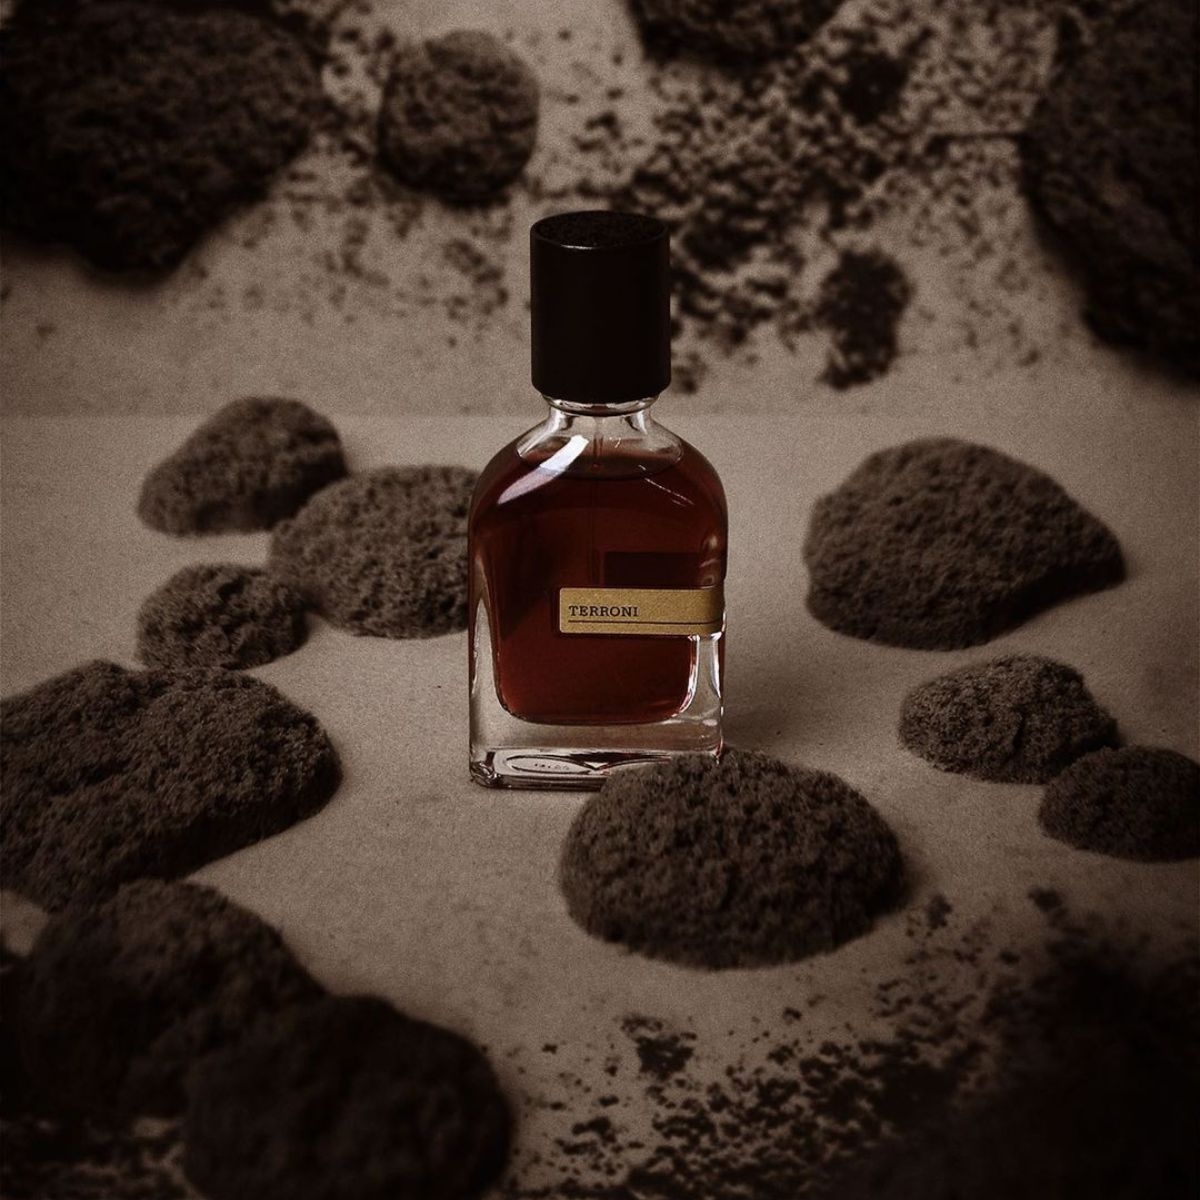 Instablog9ja on X: From @ScentHQ : Ombré Nomade is everything you hear it  is! A fantastic amber woody Frag that screams CLASS! 100ml, 540k (many  others from LV in stock!) On the